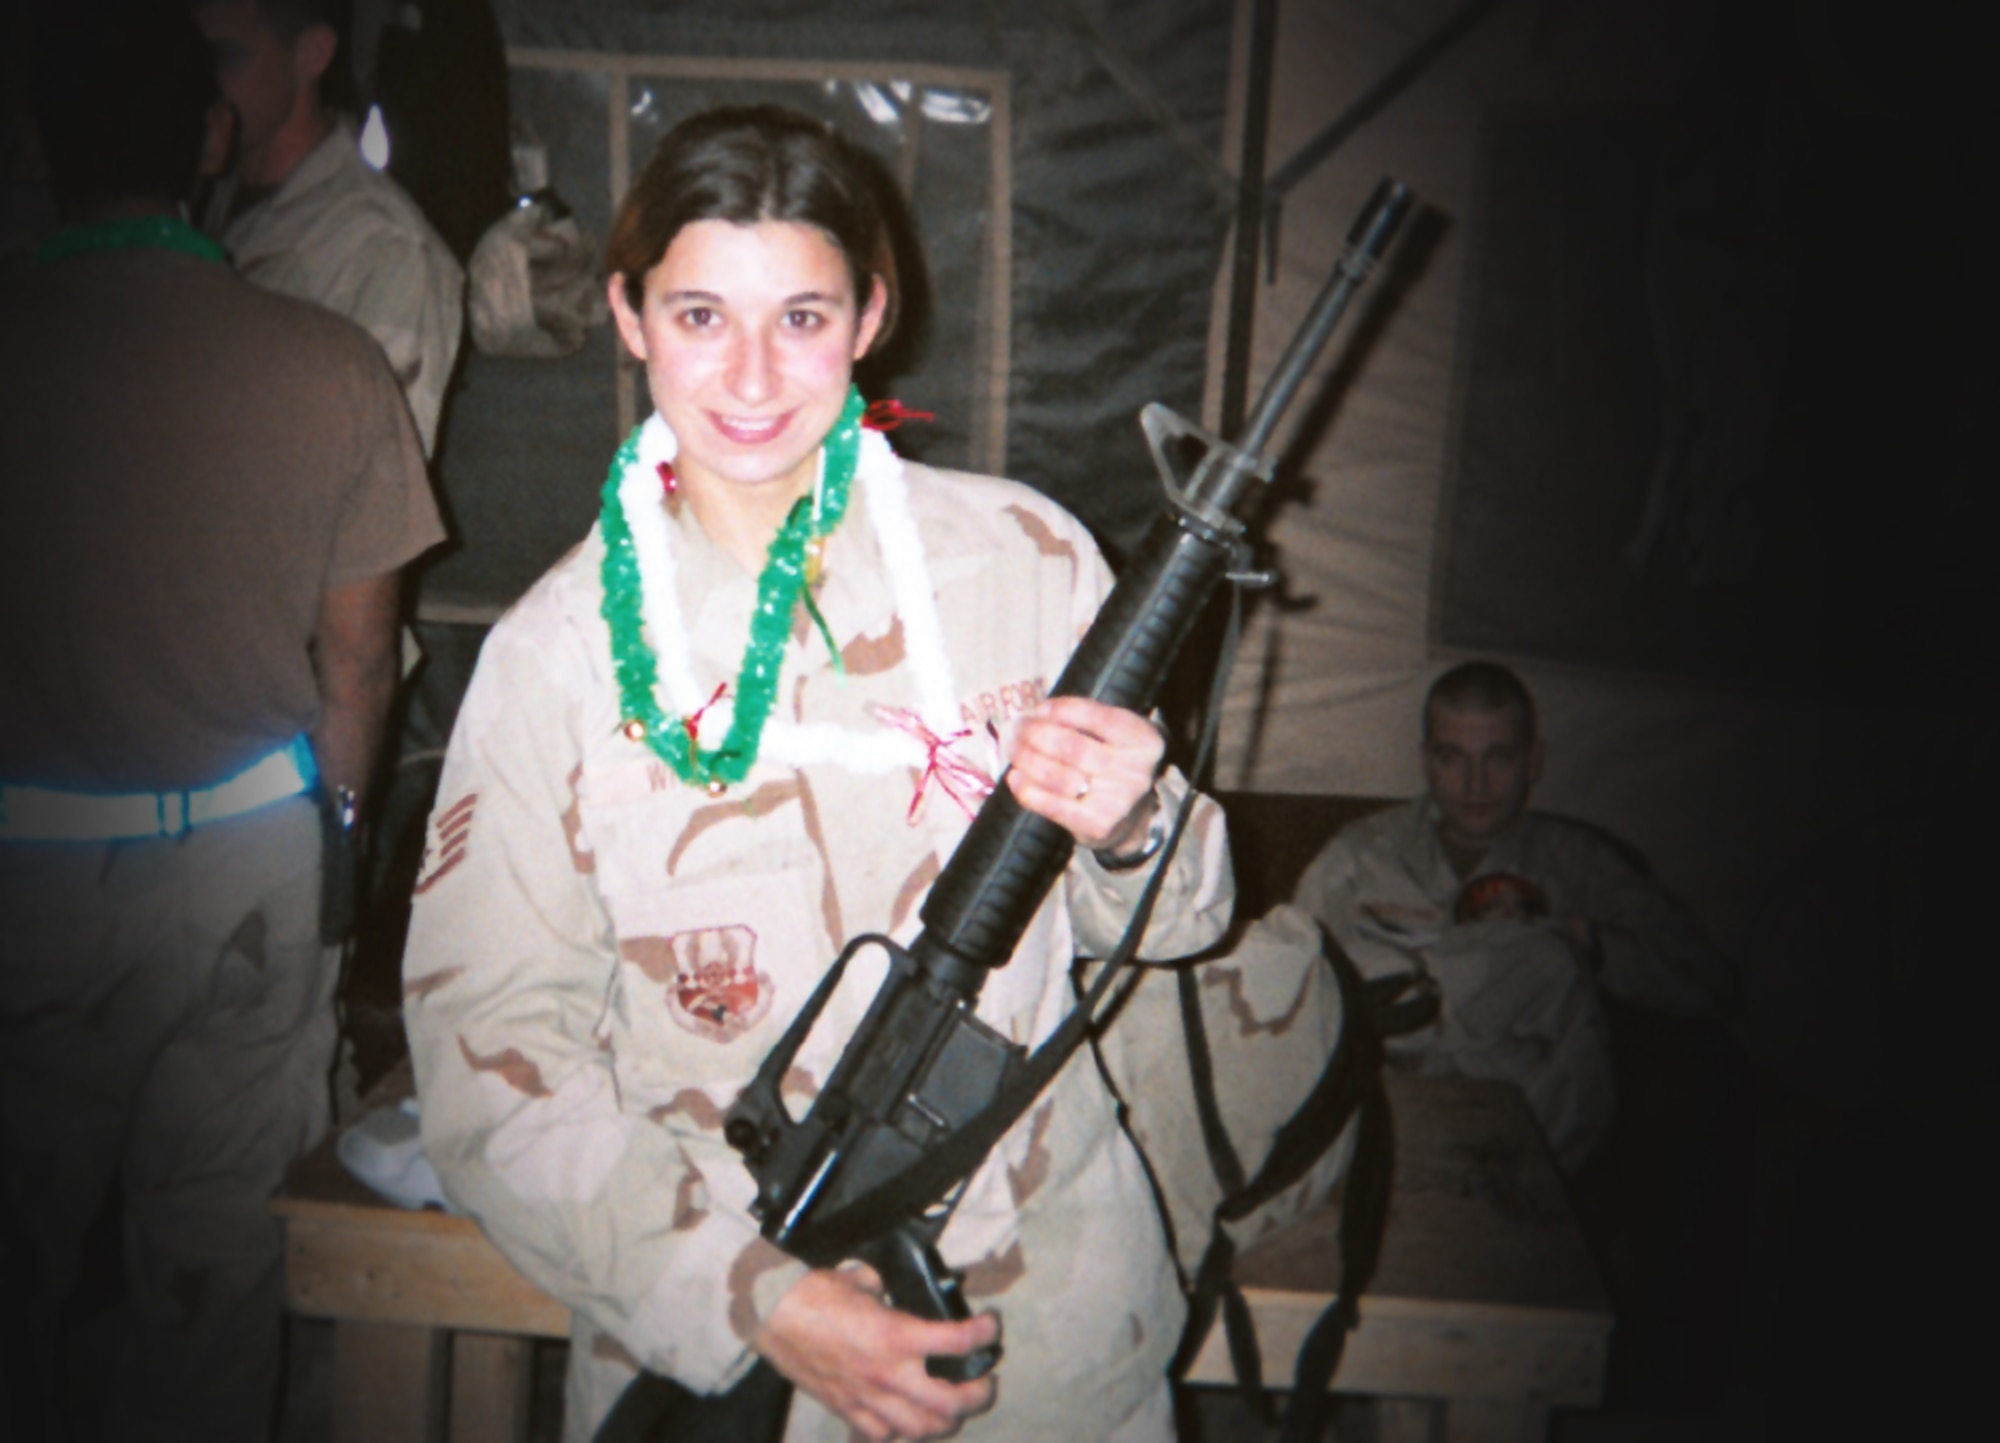 From 2004: Staff Sergeant Mary Barnett during her deployment from Hill Air Force Base to Balad Air Base, Iraq, as an F-16 avionics technician with the 421st Aircraft Maintenance Unit. Barnett was wounded in a mortar attack on the base in the early morning hours of Sept. 11, 2004. (Courtesy photo)